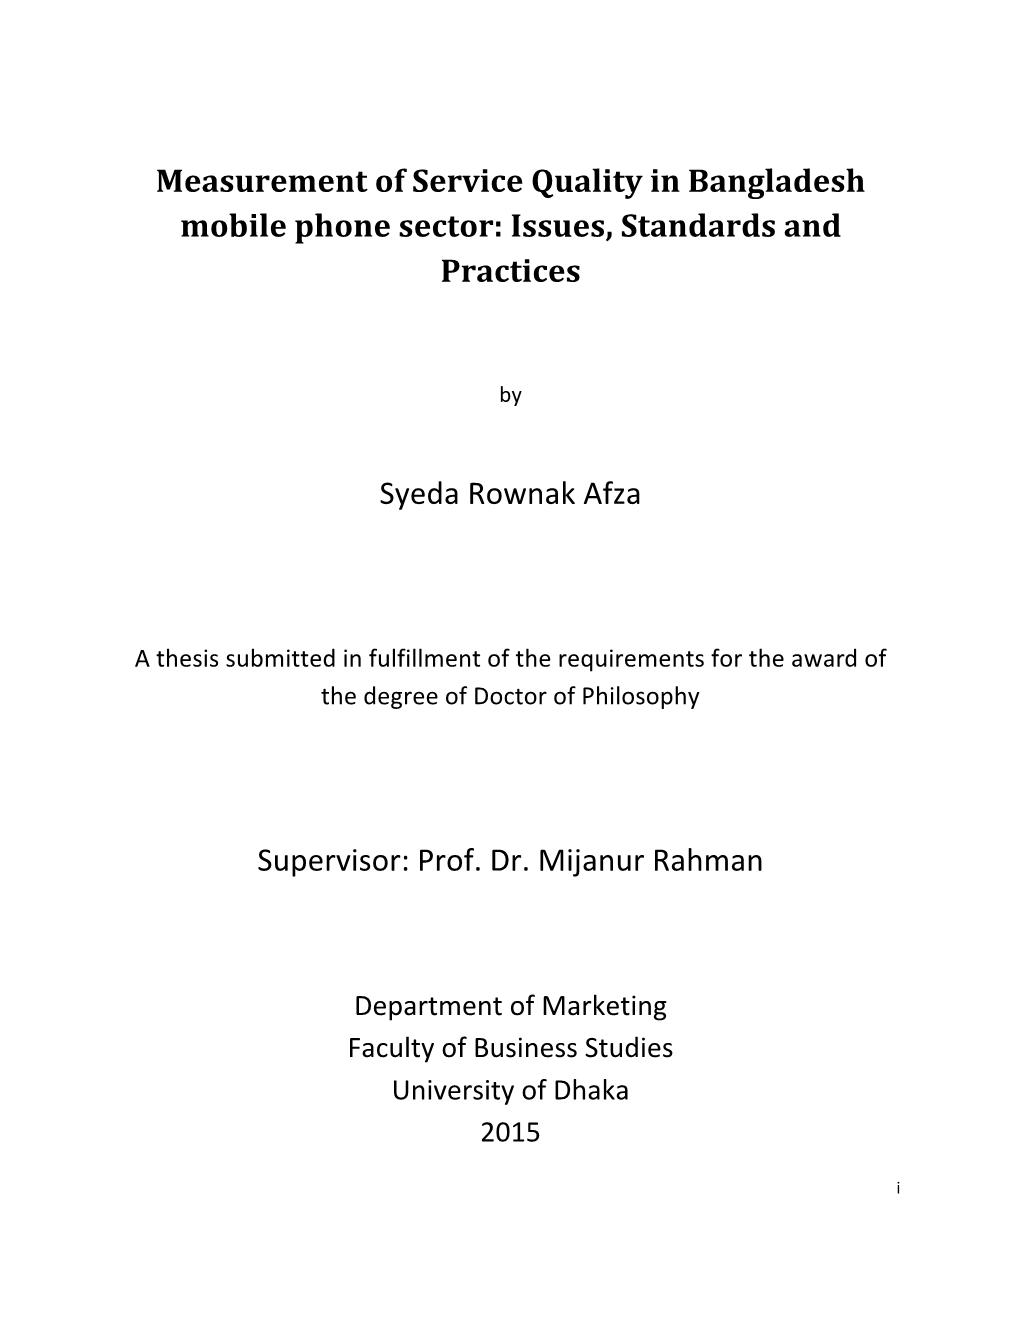 Measurement of Service Quality in Bangladesh Mobile Phone Sector: Issues, Standards and Practices